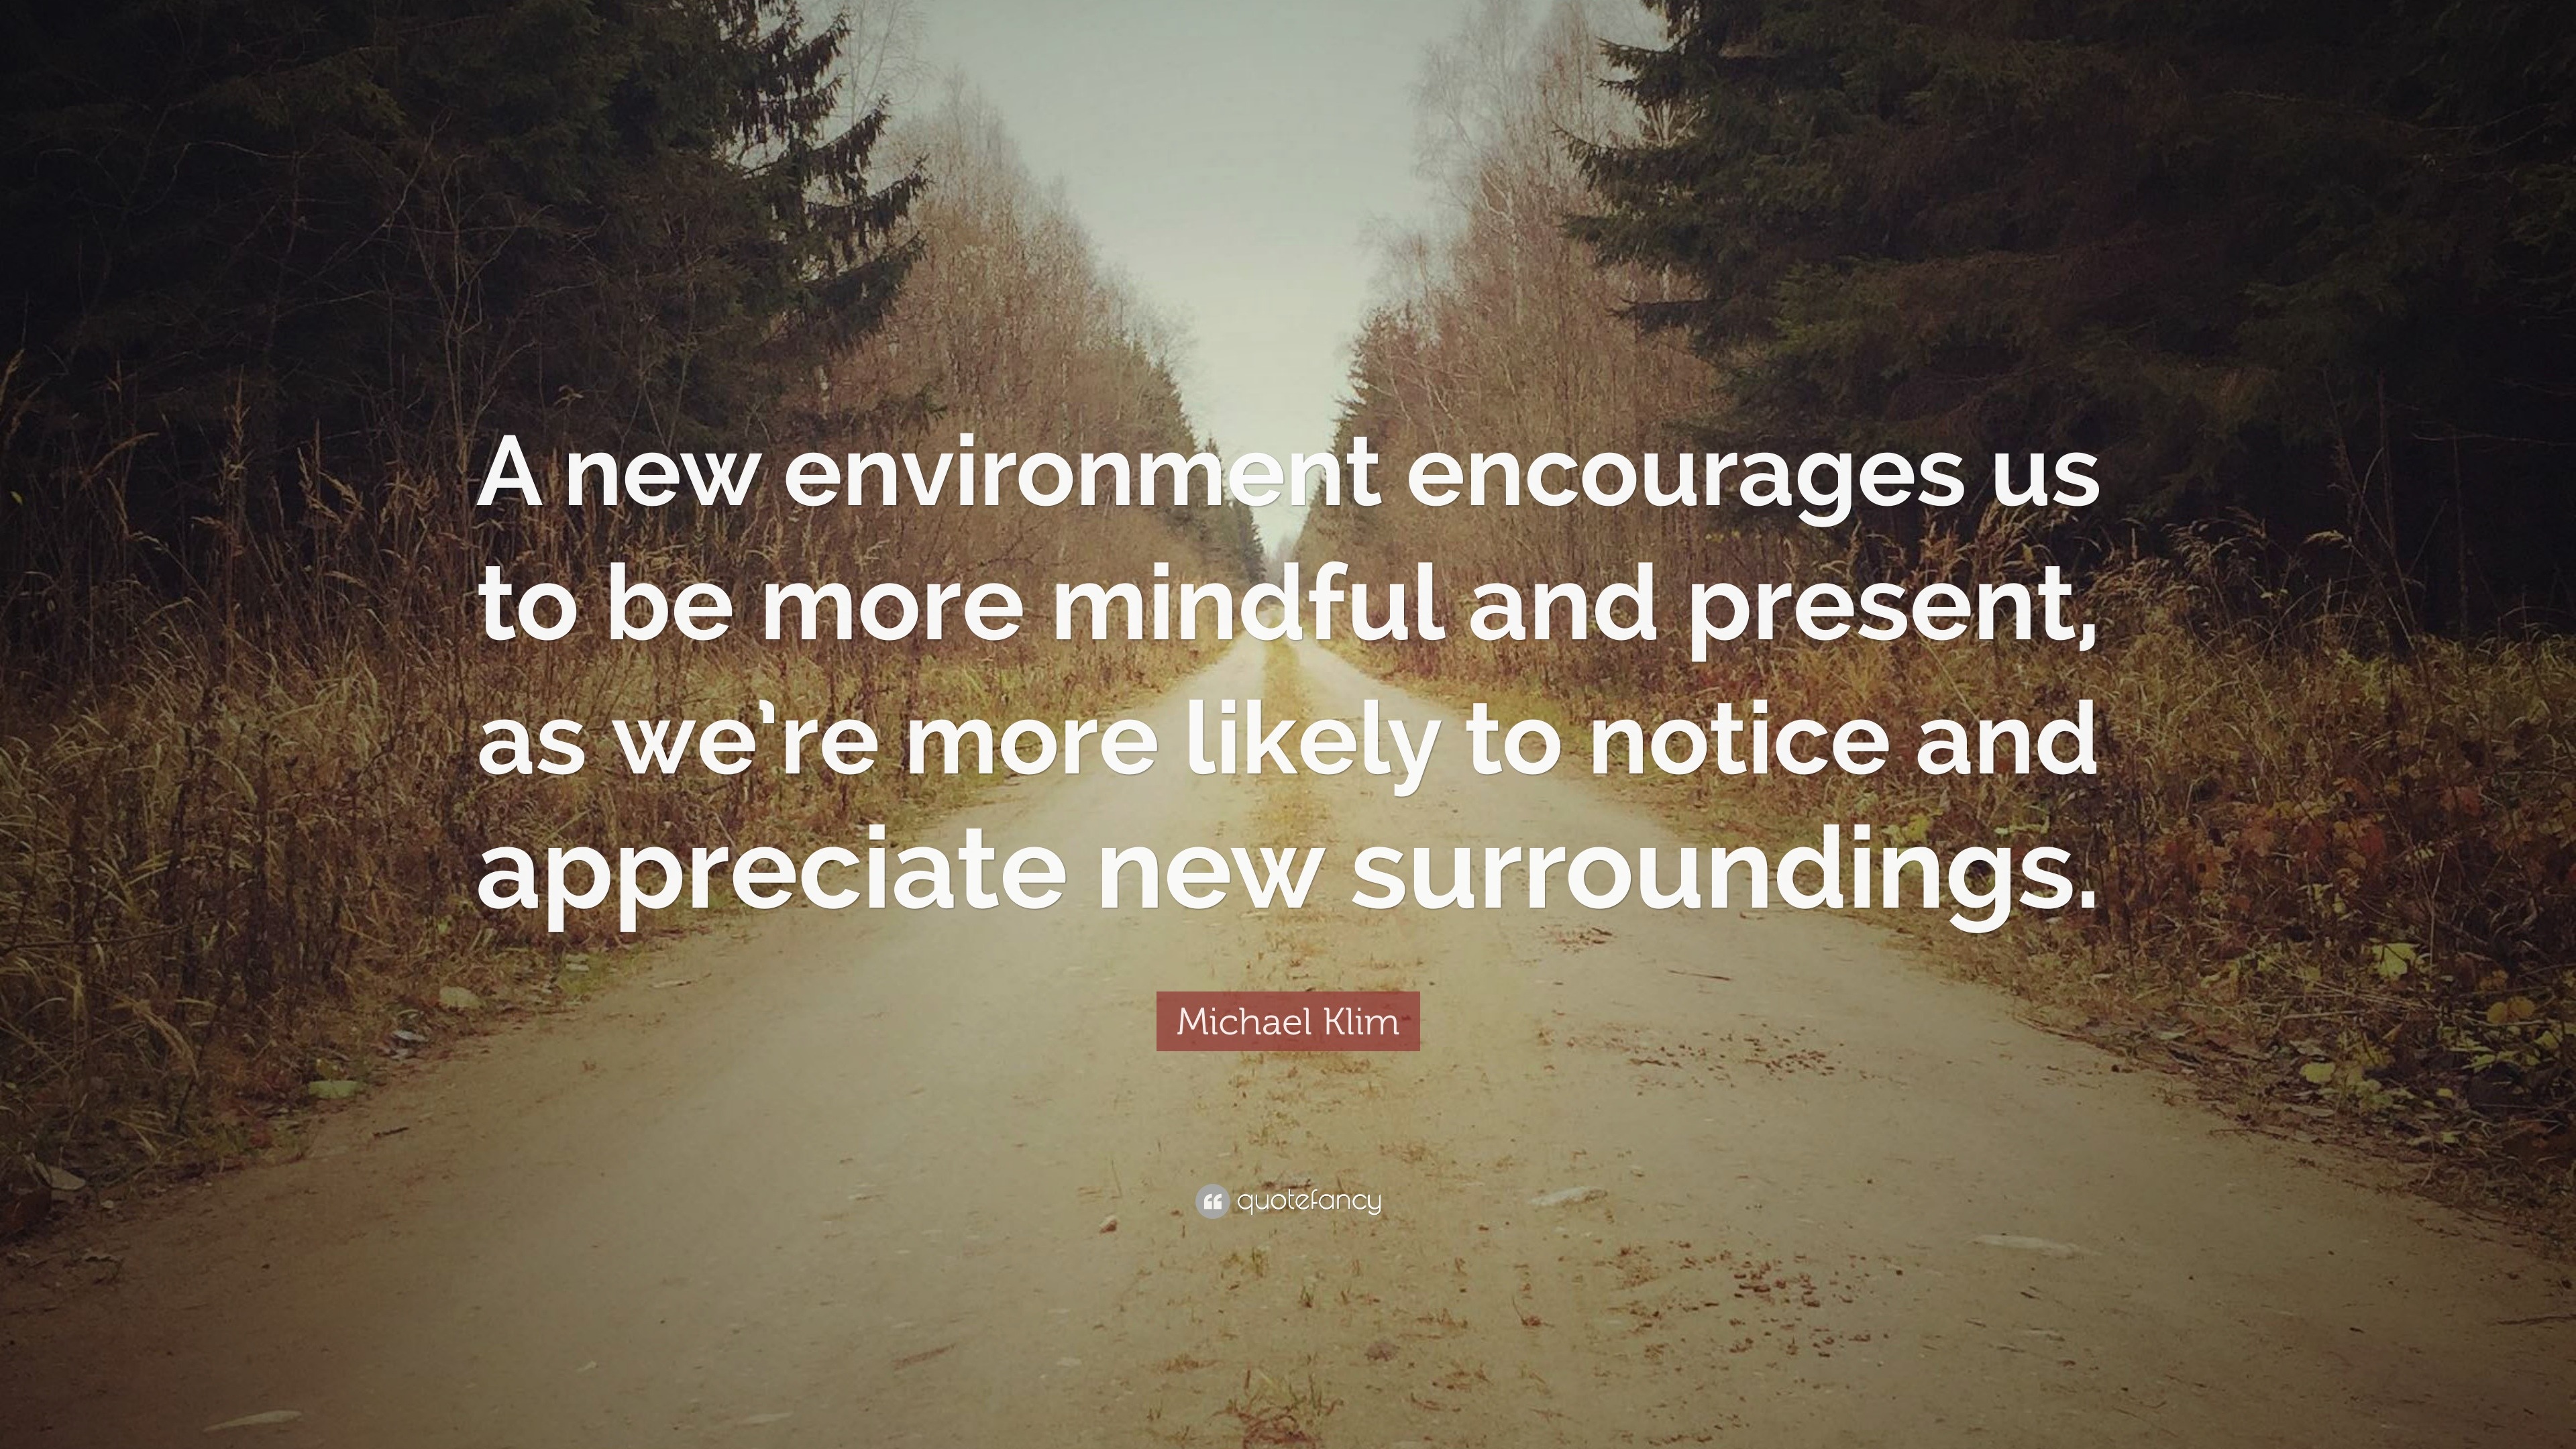 Michael Klim Quote: “A new environment encourages us to be more mindful